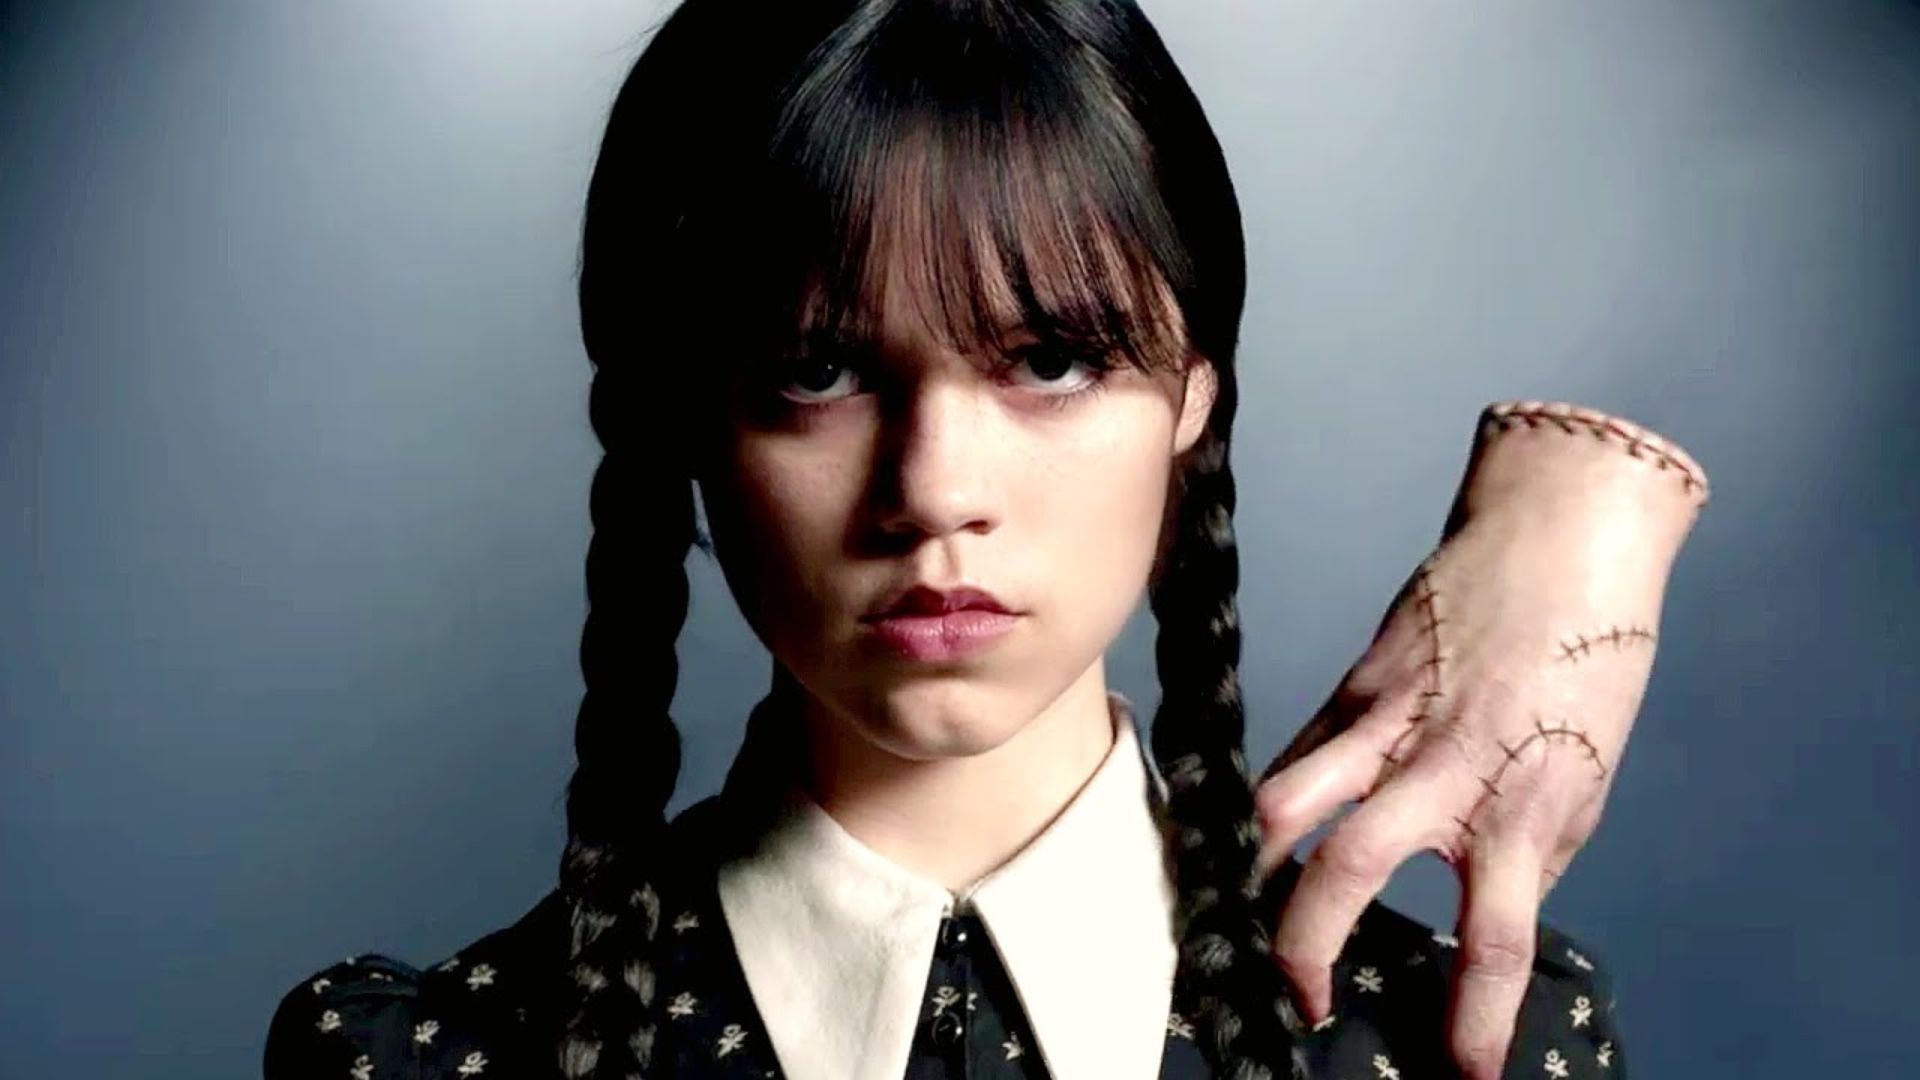 The new teaser for Netflix's take of Wednesday Addams proves that she is legit troublemaker. The West News